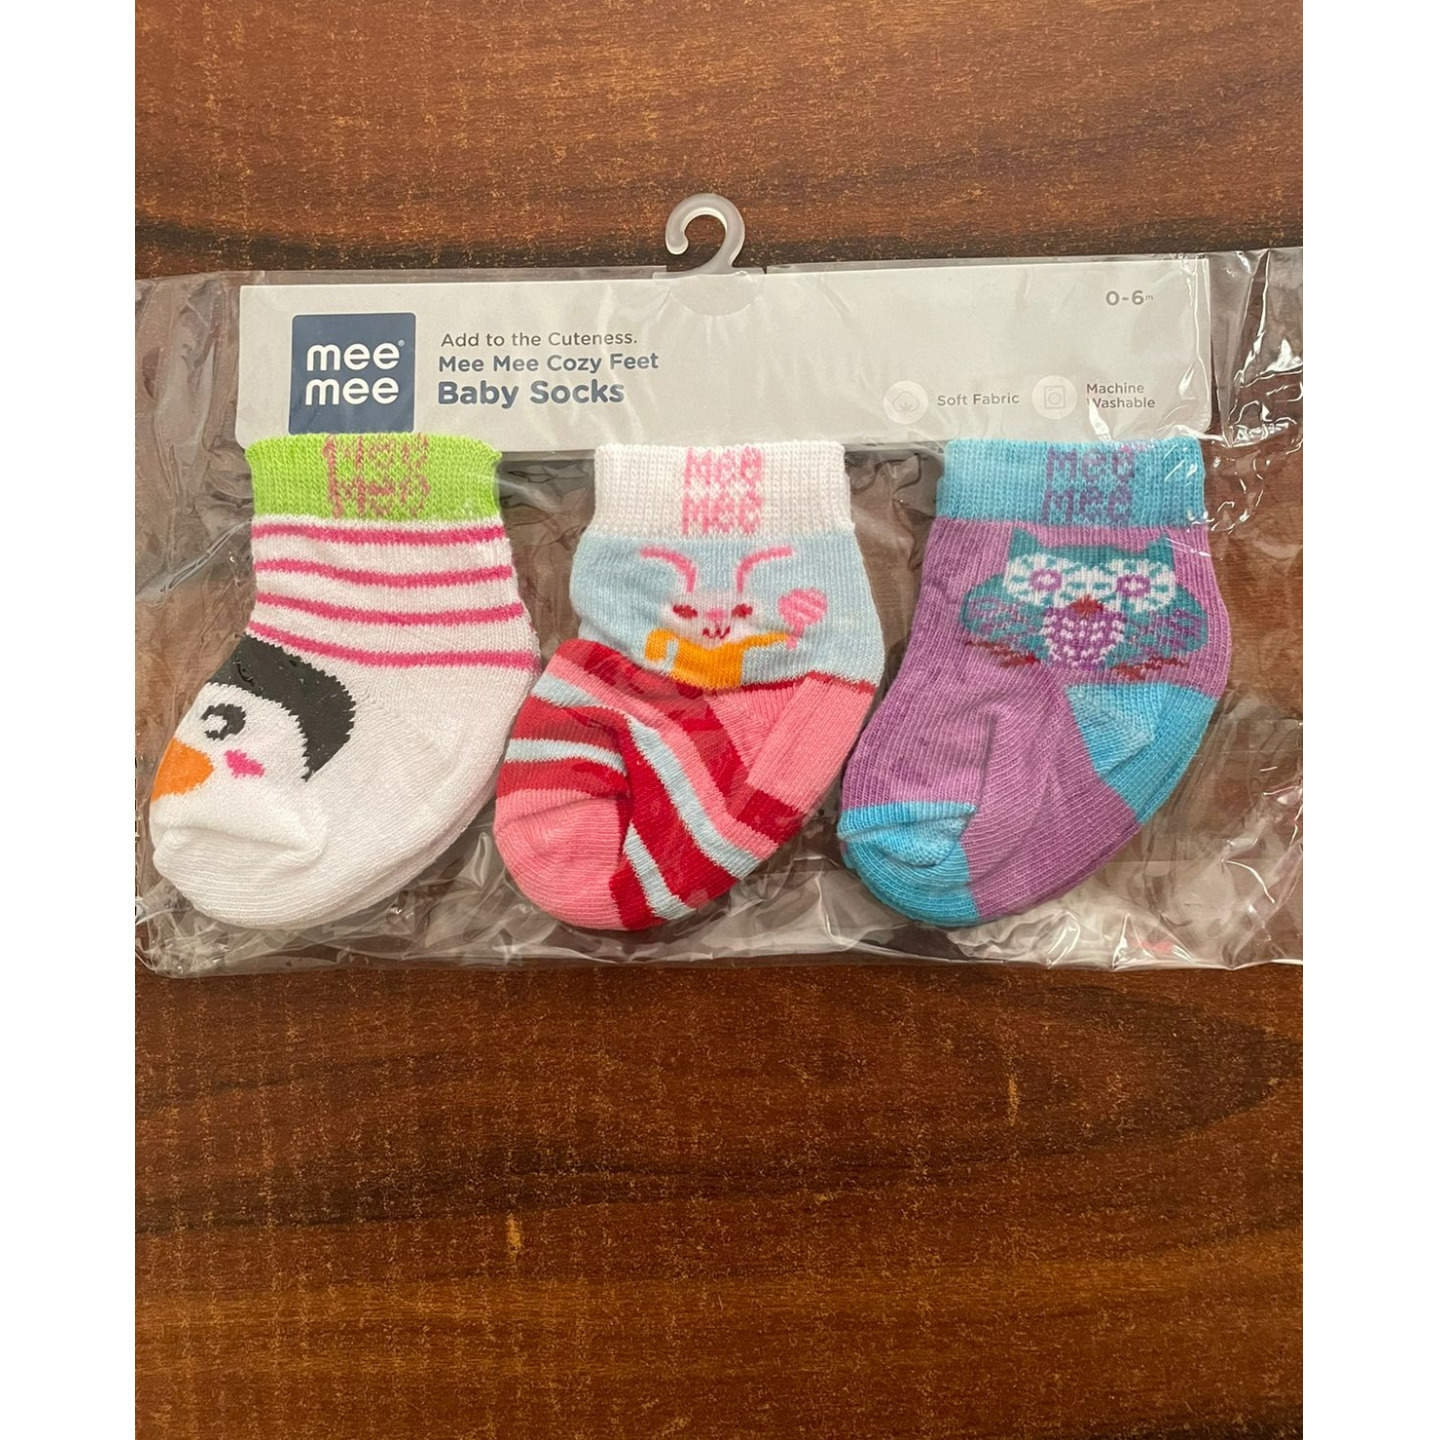 Mee Mee Socks Rs 220 Only Pack of 3 0 to 24 Months